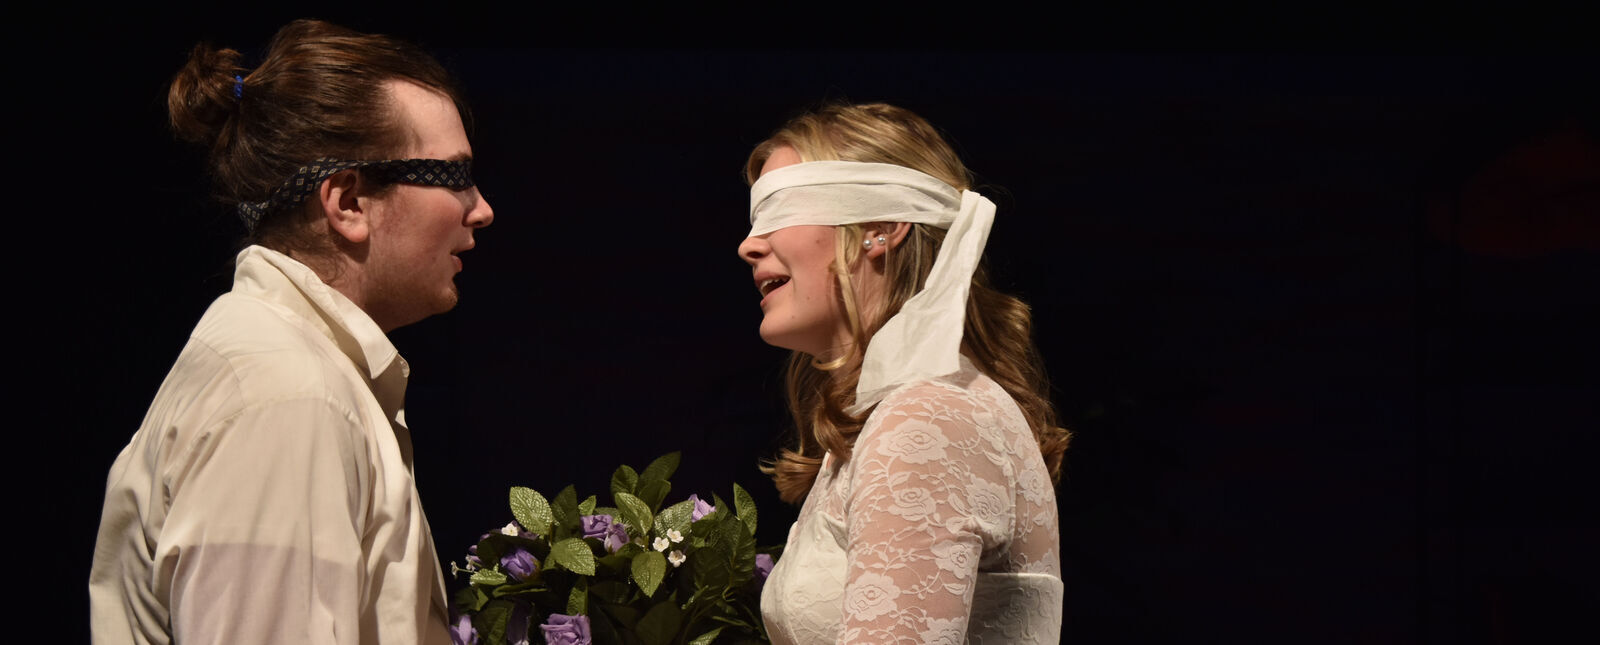 A male and female student wear blindfolds and face each other wearing wedding attire in the play Love/Sick